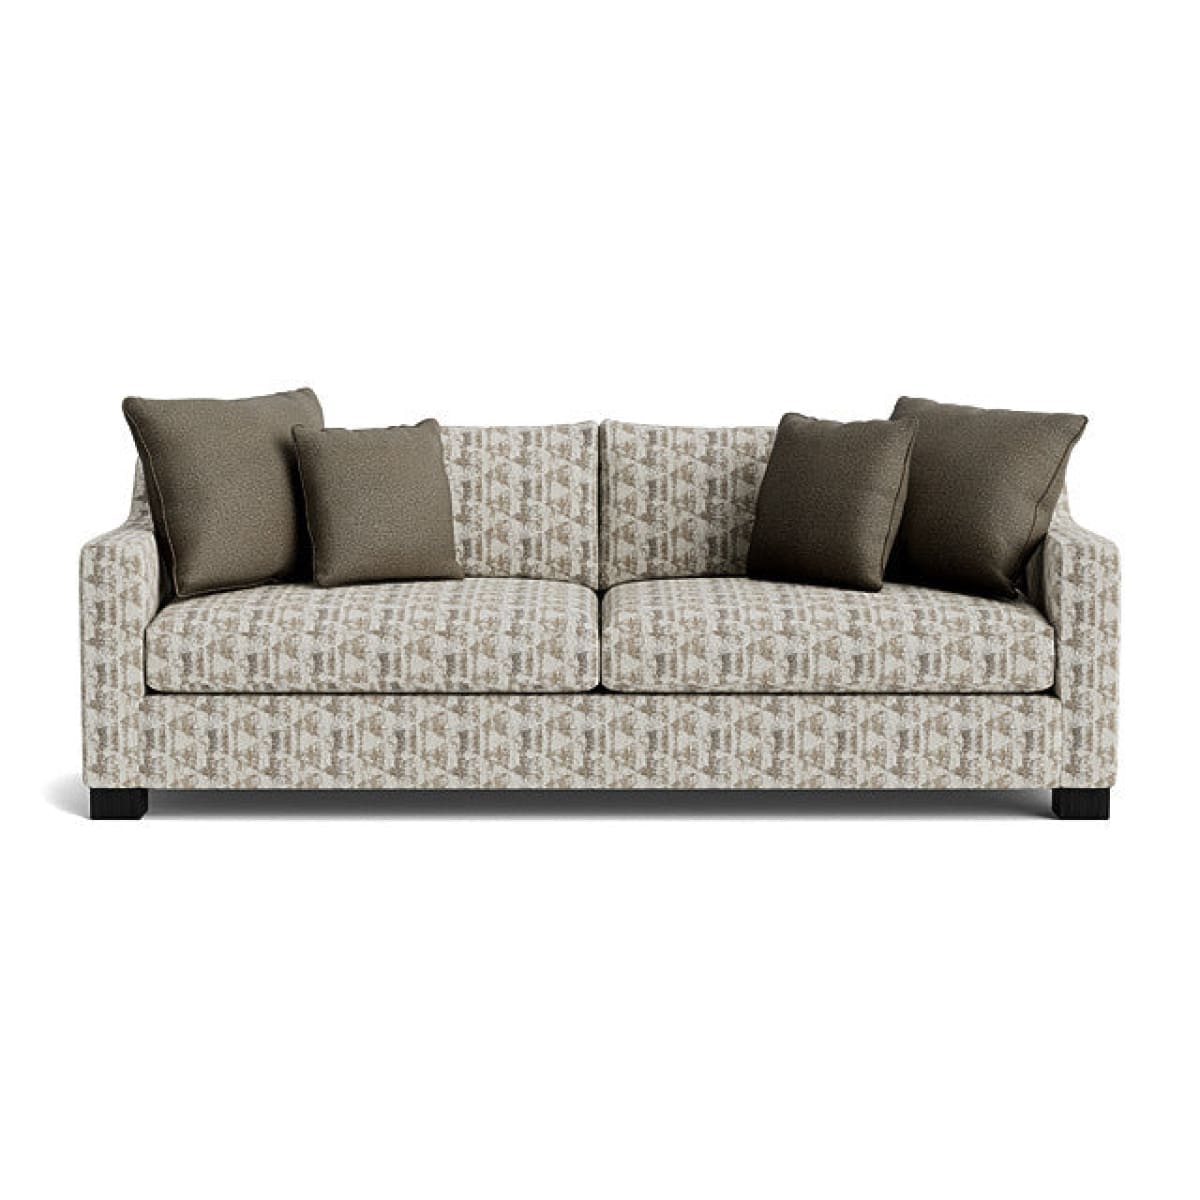 Ewing Sofa - Sectional - Voyager Cloud